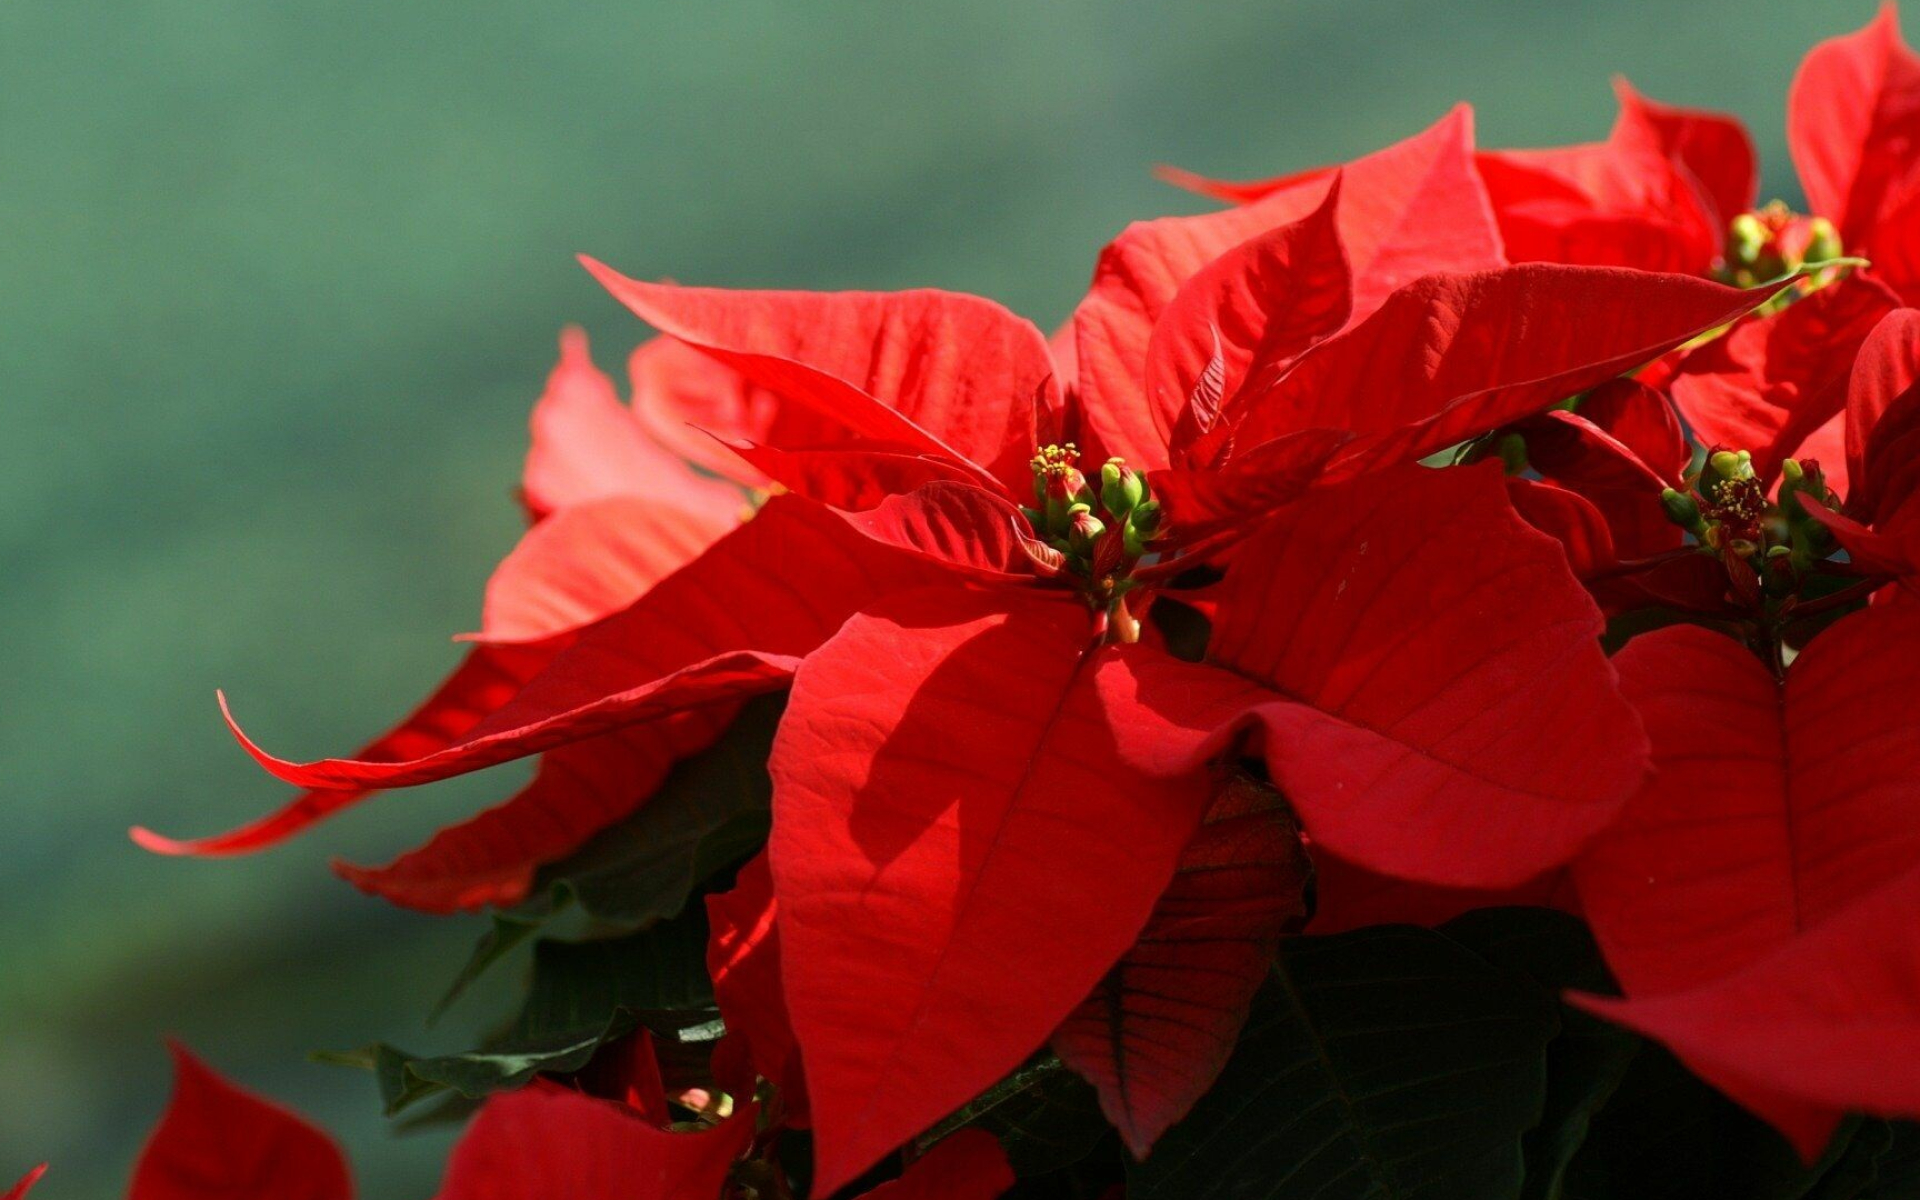 Poinsettia: It was named for Joel R Poinsett, who popularized the plant and introduced it to floriculture while he was US minister to Mexico in the late 1820s. 1920x1200 HD Wallpaper.